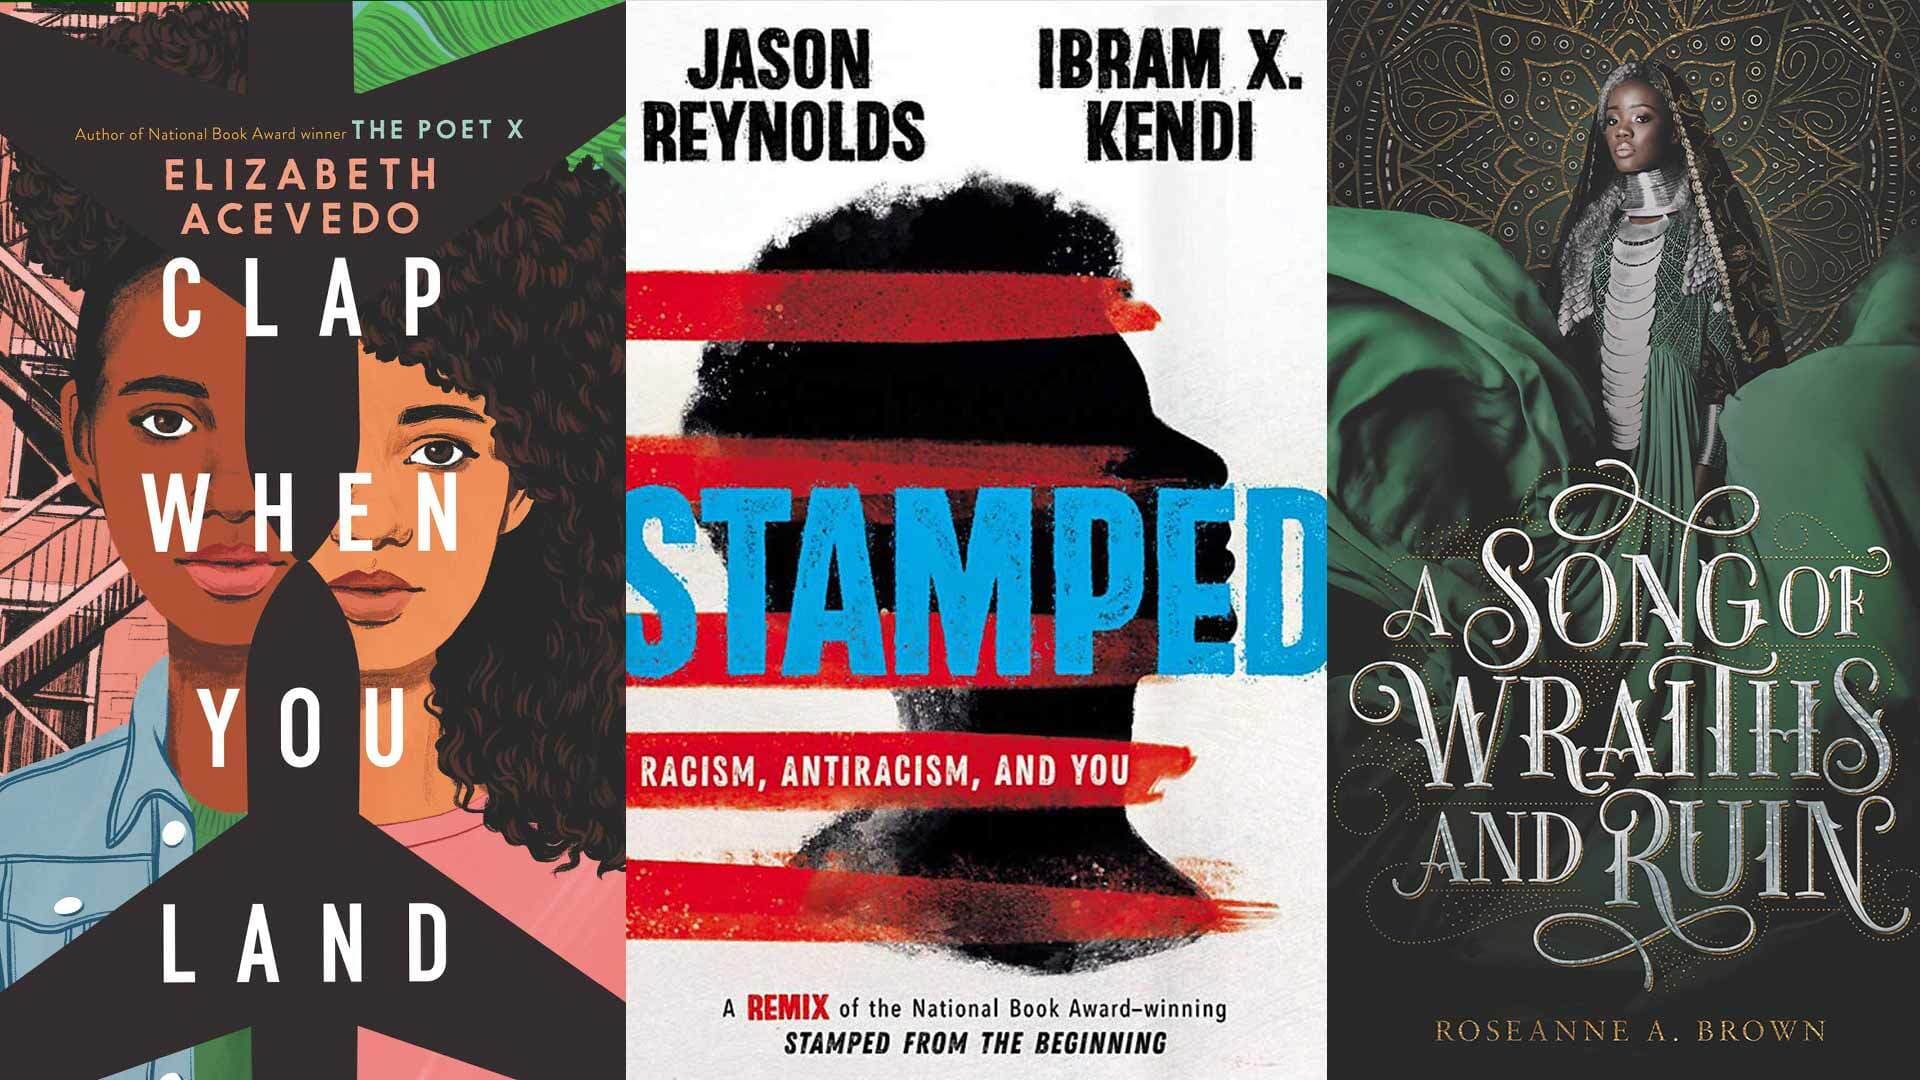 Terps Elizabeth Acevedo MFA ’15 (top), Jason Reynolds ’05 (middle) and Roseanne A. Brown ’17 (at bottom), all had books last week in New York Times’ list of bestselling hardcover books for young adults